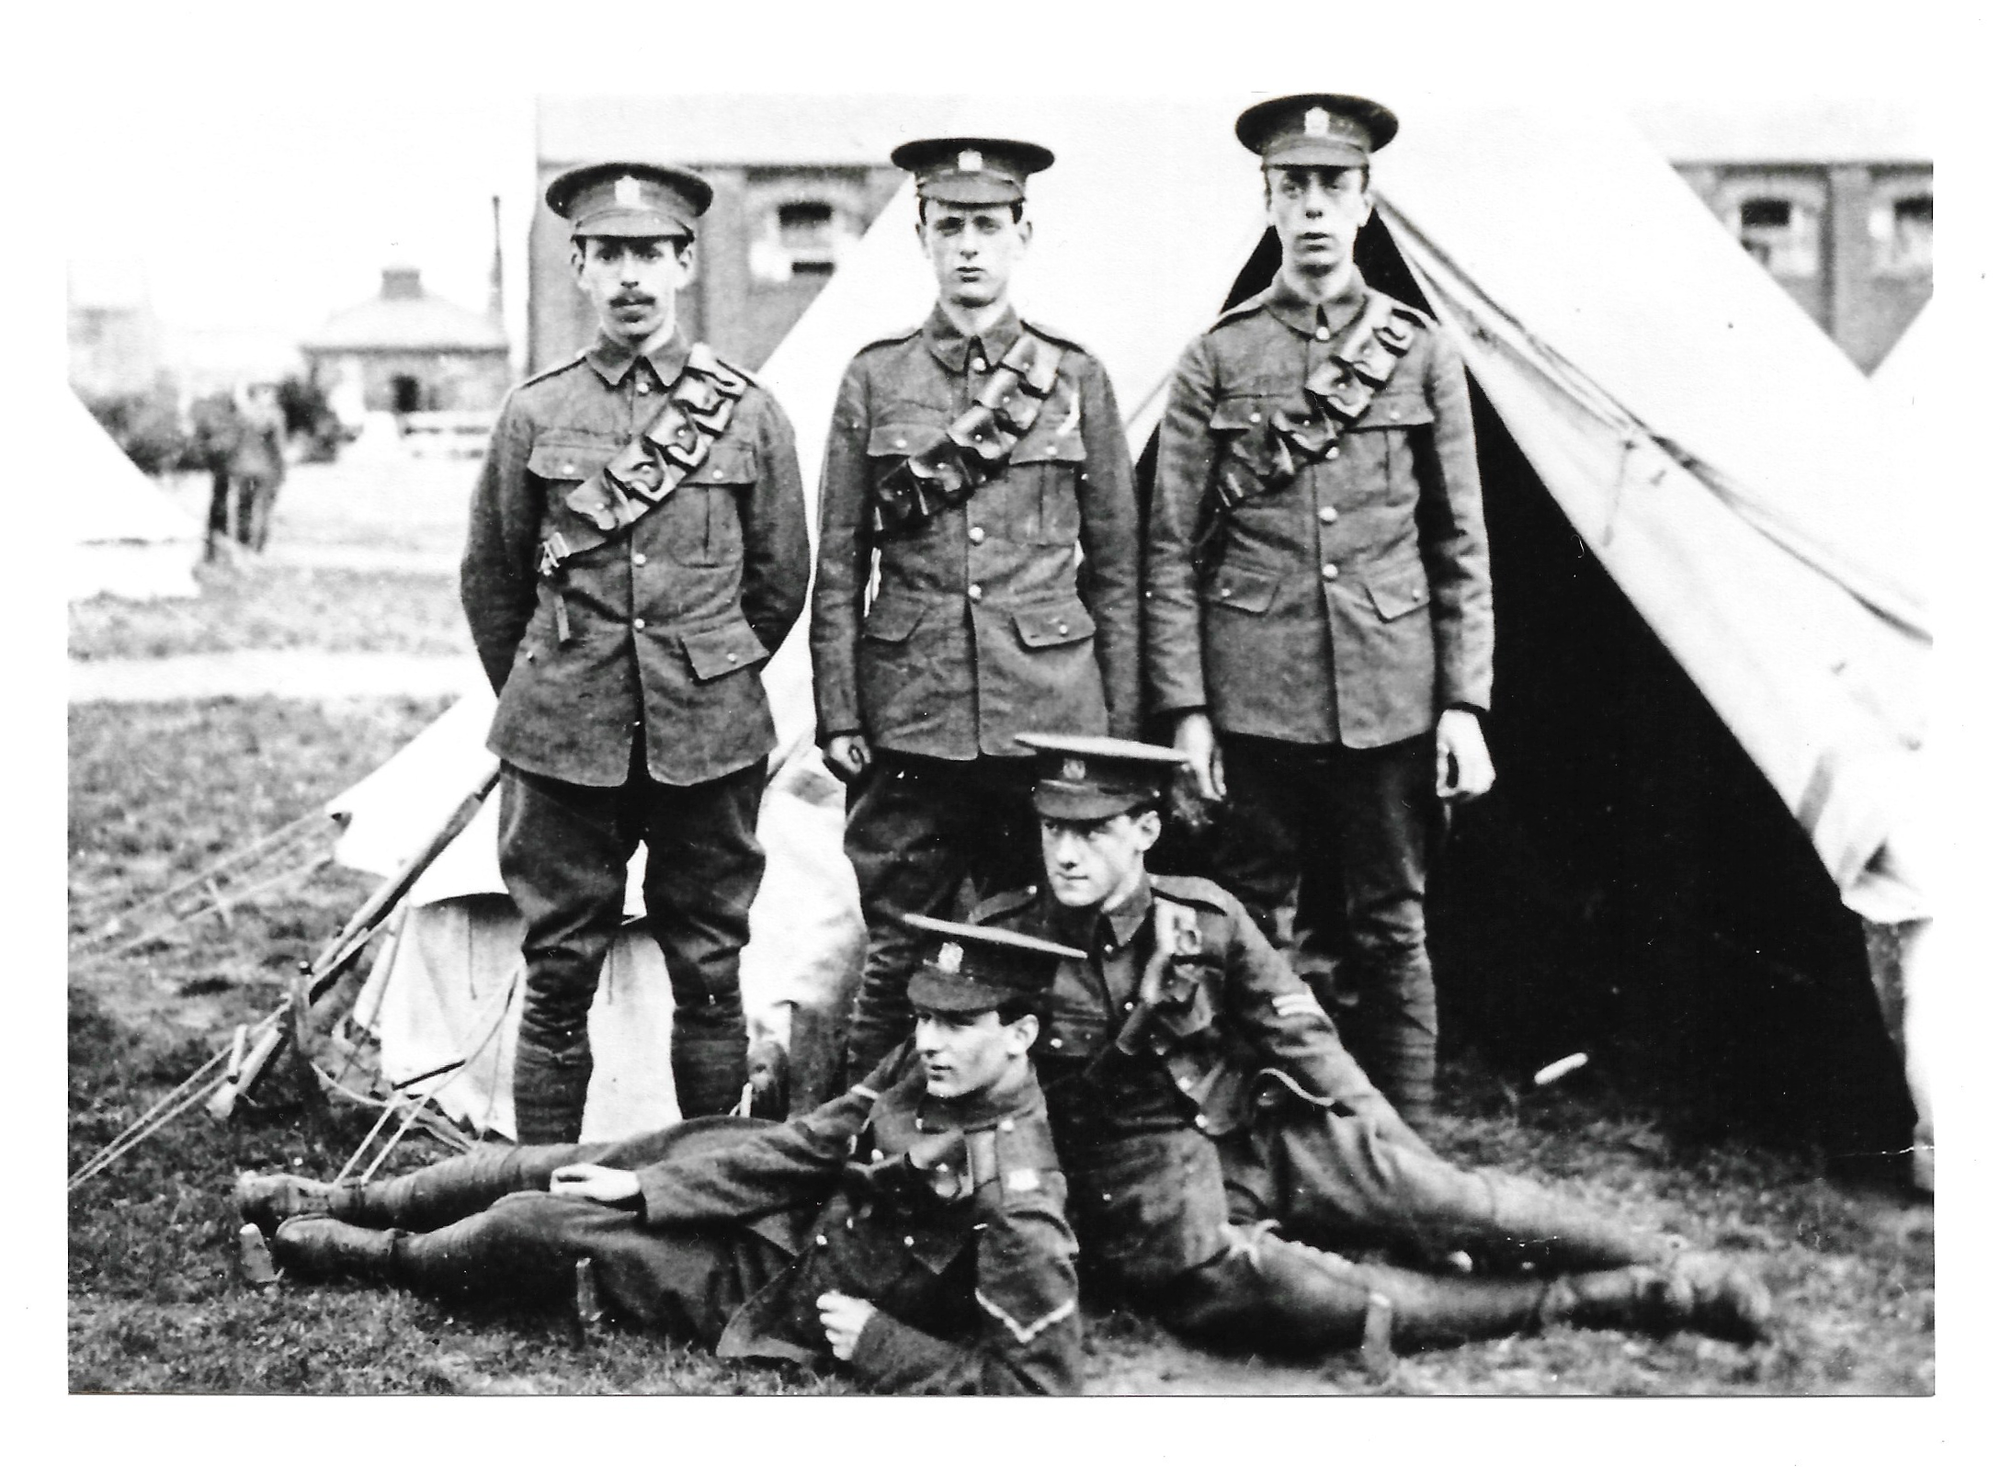 Five KEH men at camp - young looking recruits with a Lance Corporal and Corporal. KEH cap badges and KEH KODR shoulder titles visible.